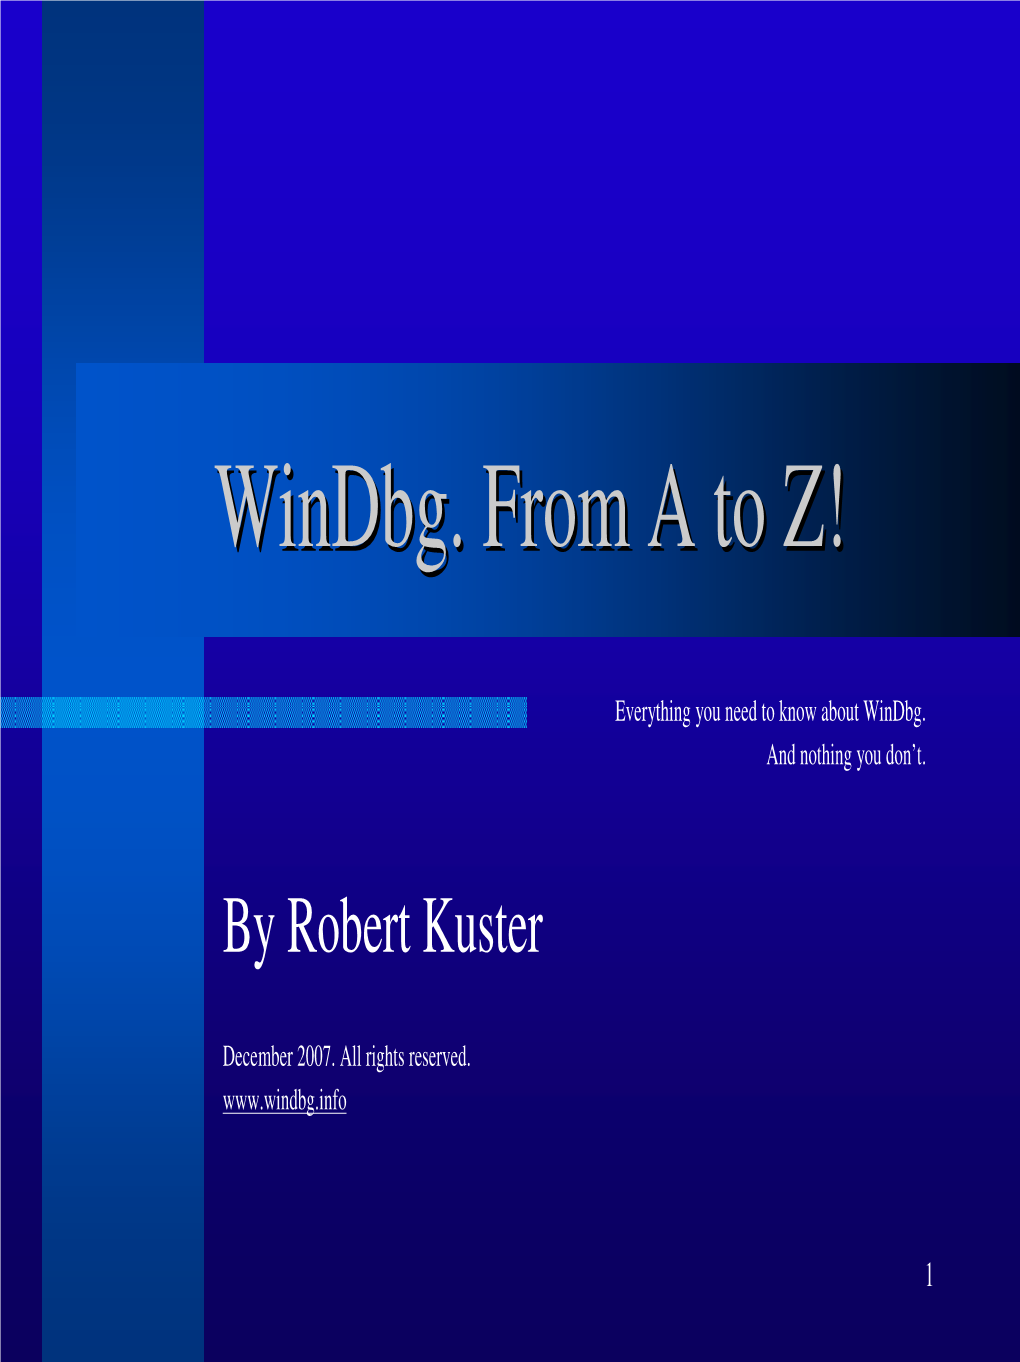 Windbg. from a to Z!” Is a Quick Start and Introduction to Windbg